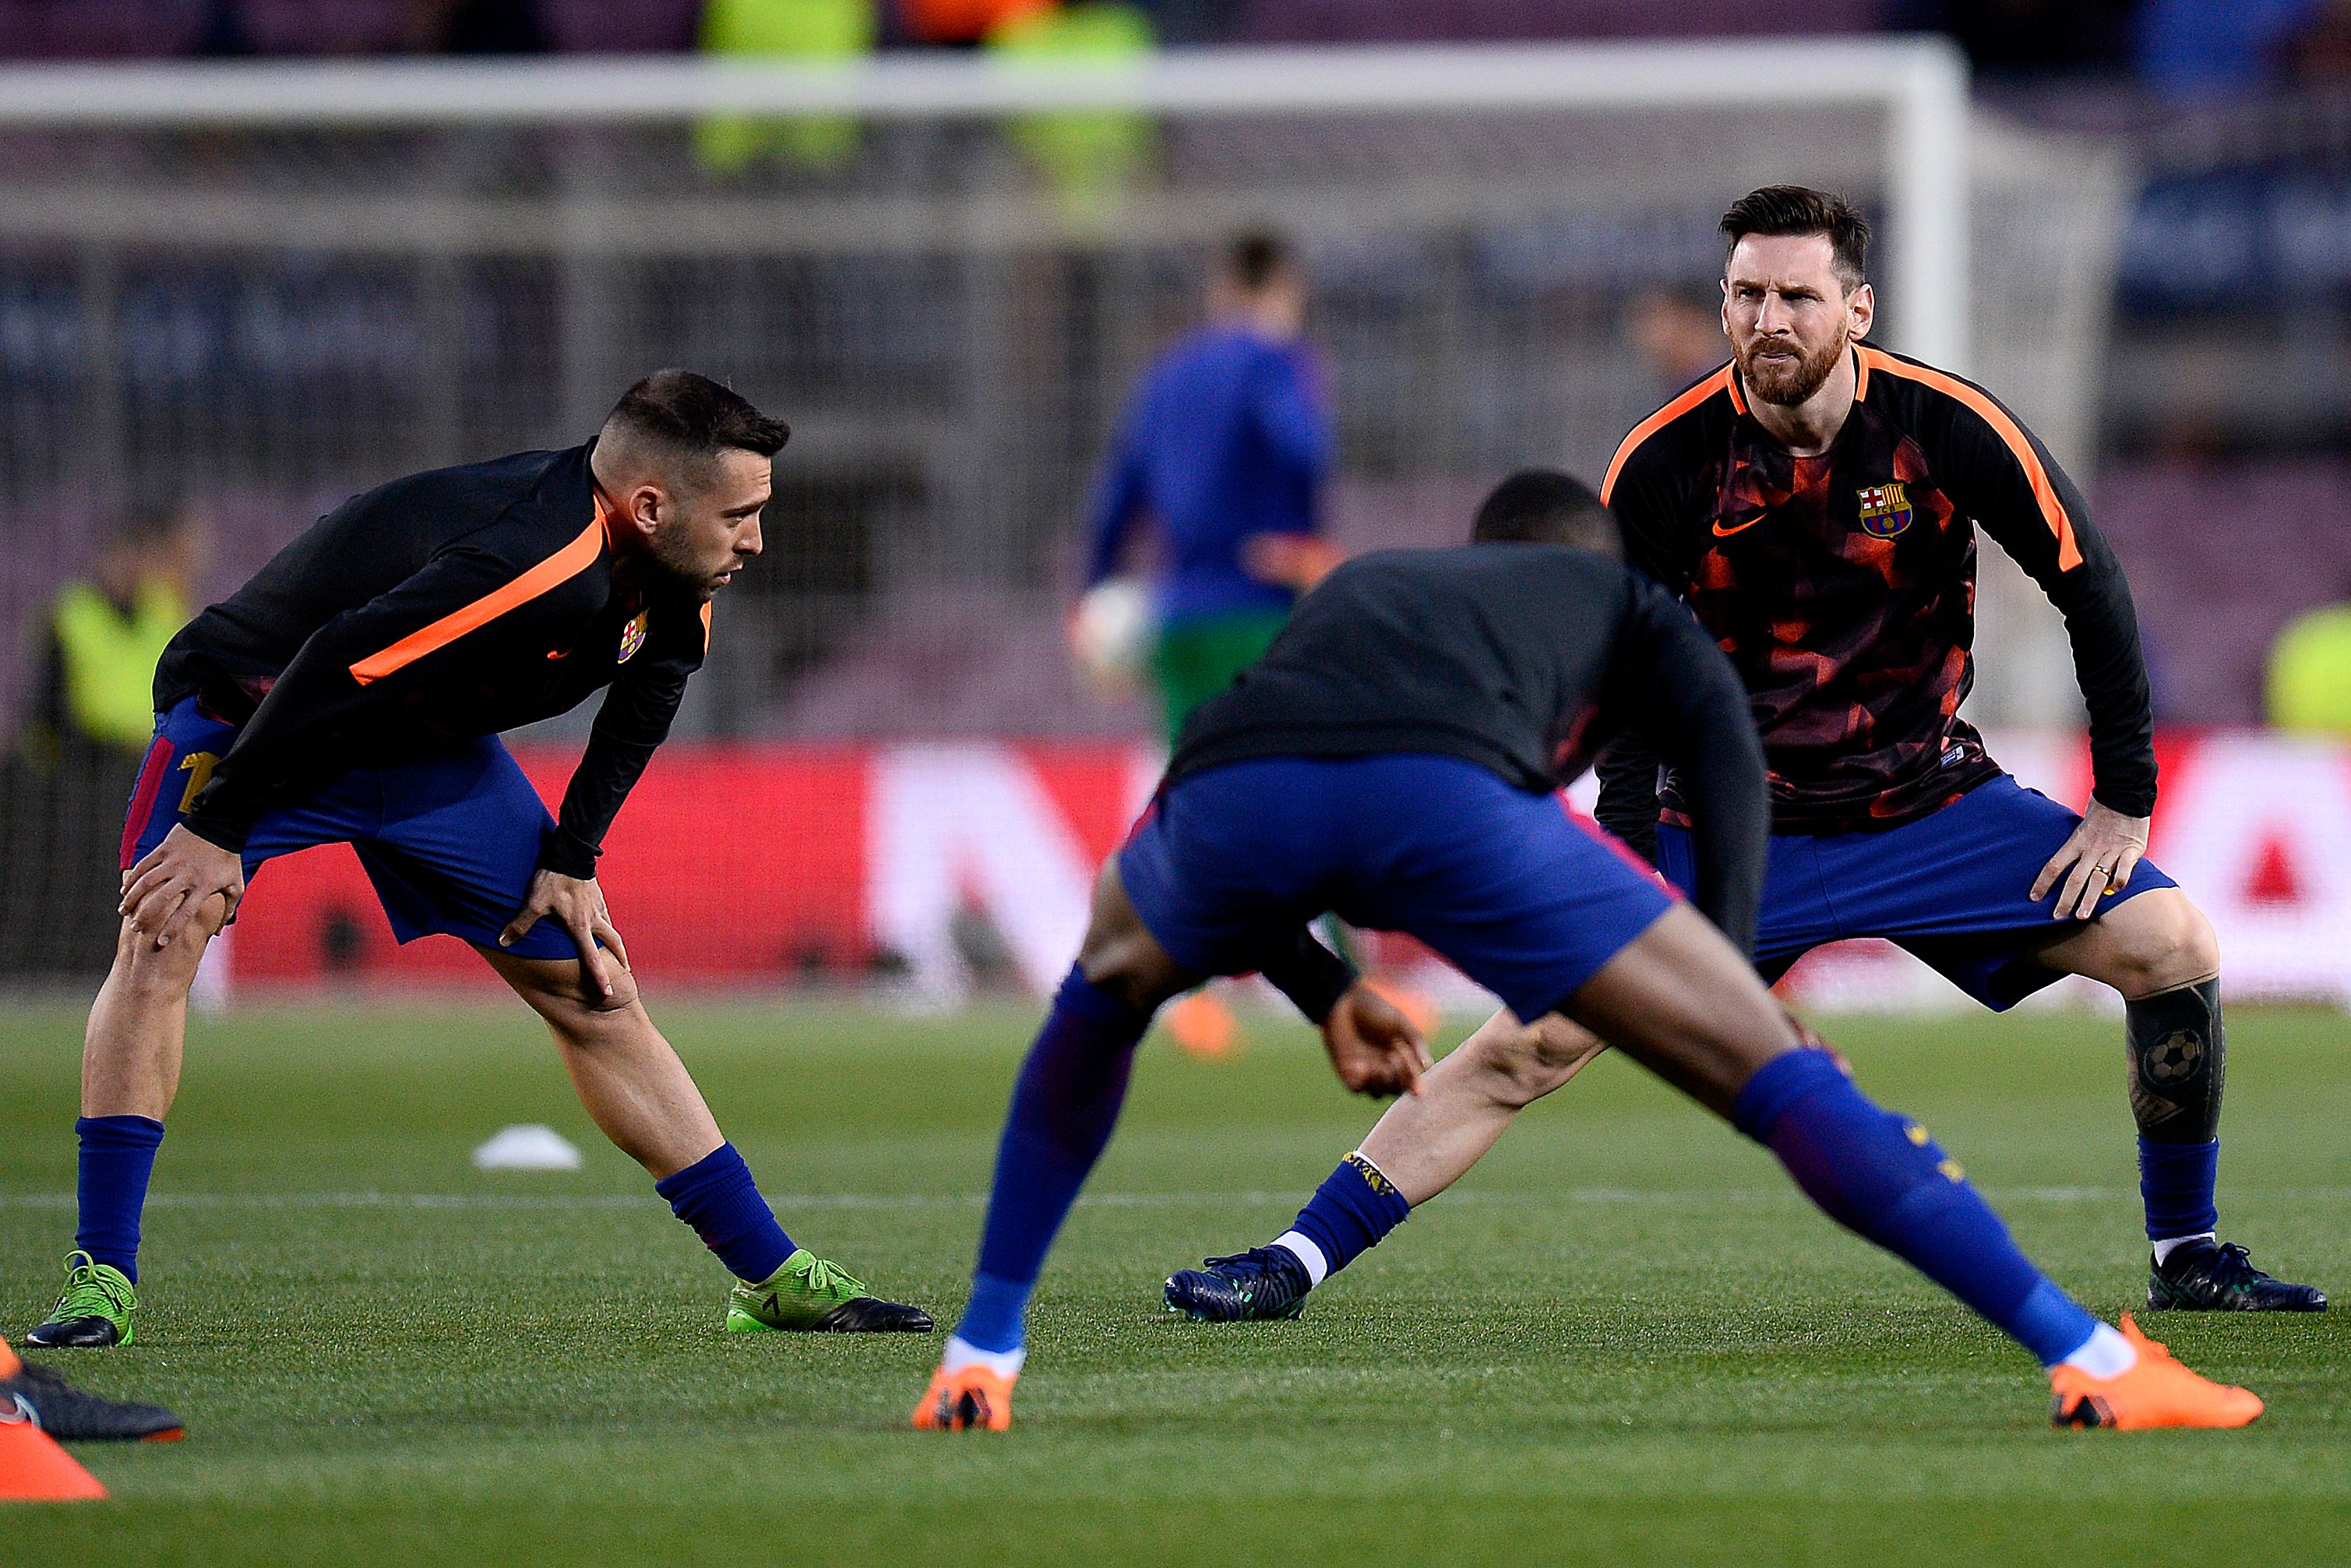 Jordi Alba and Lionel Messi will be unavailable for Barcelona (Photo by JOSEP LAGO/AFP/Getty Images)